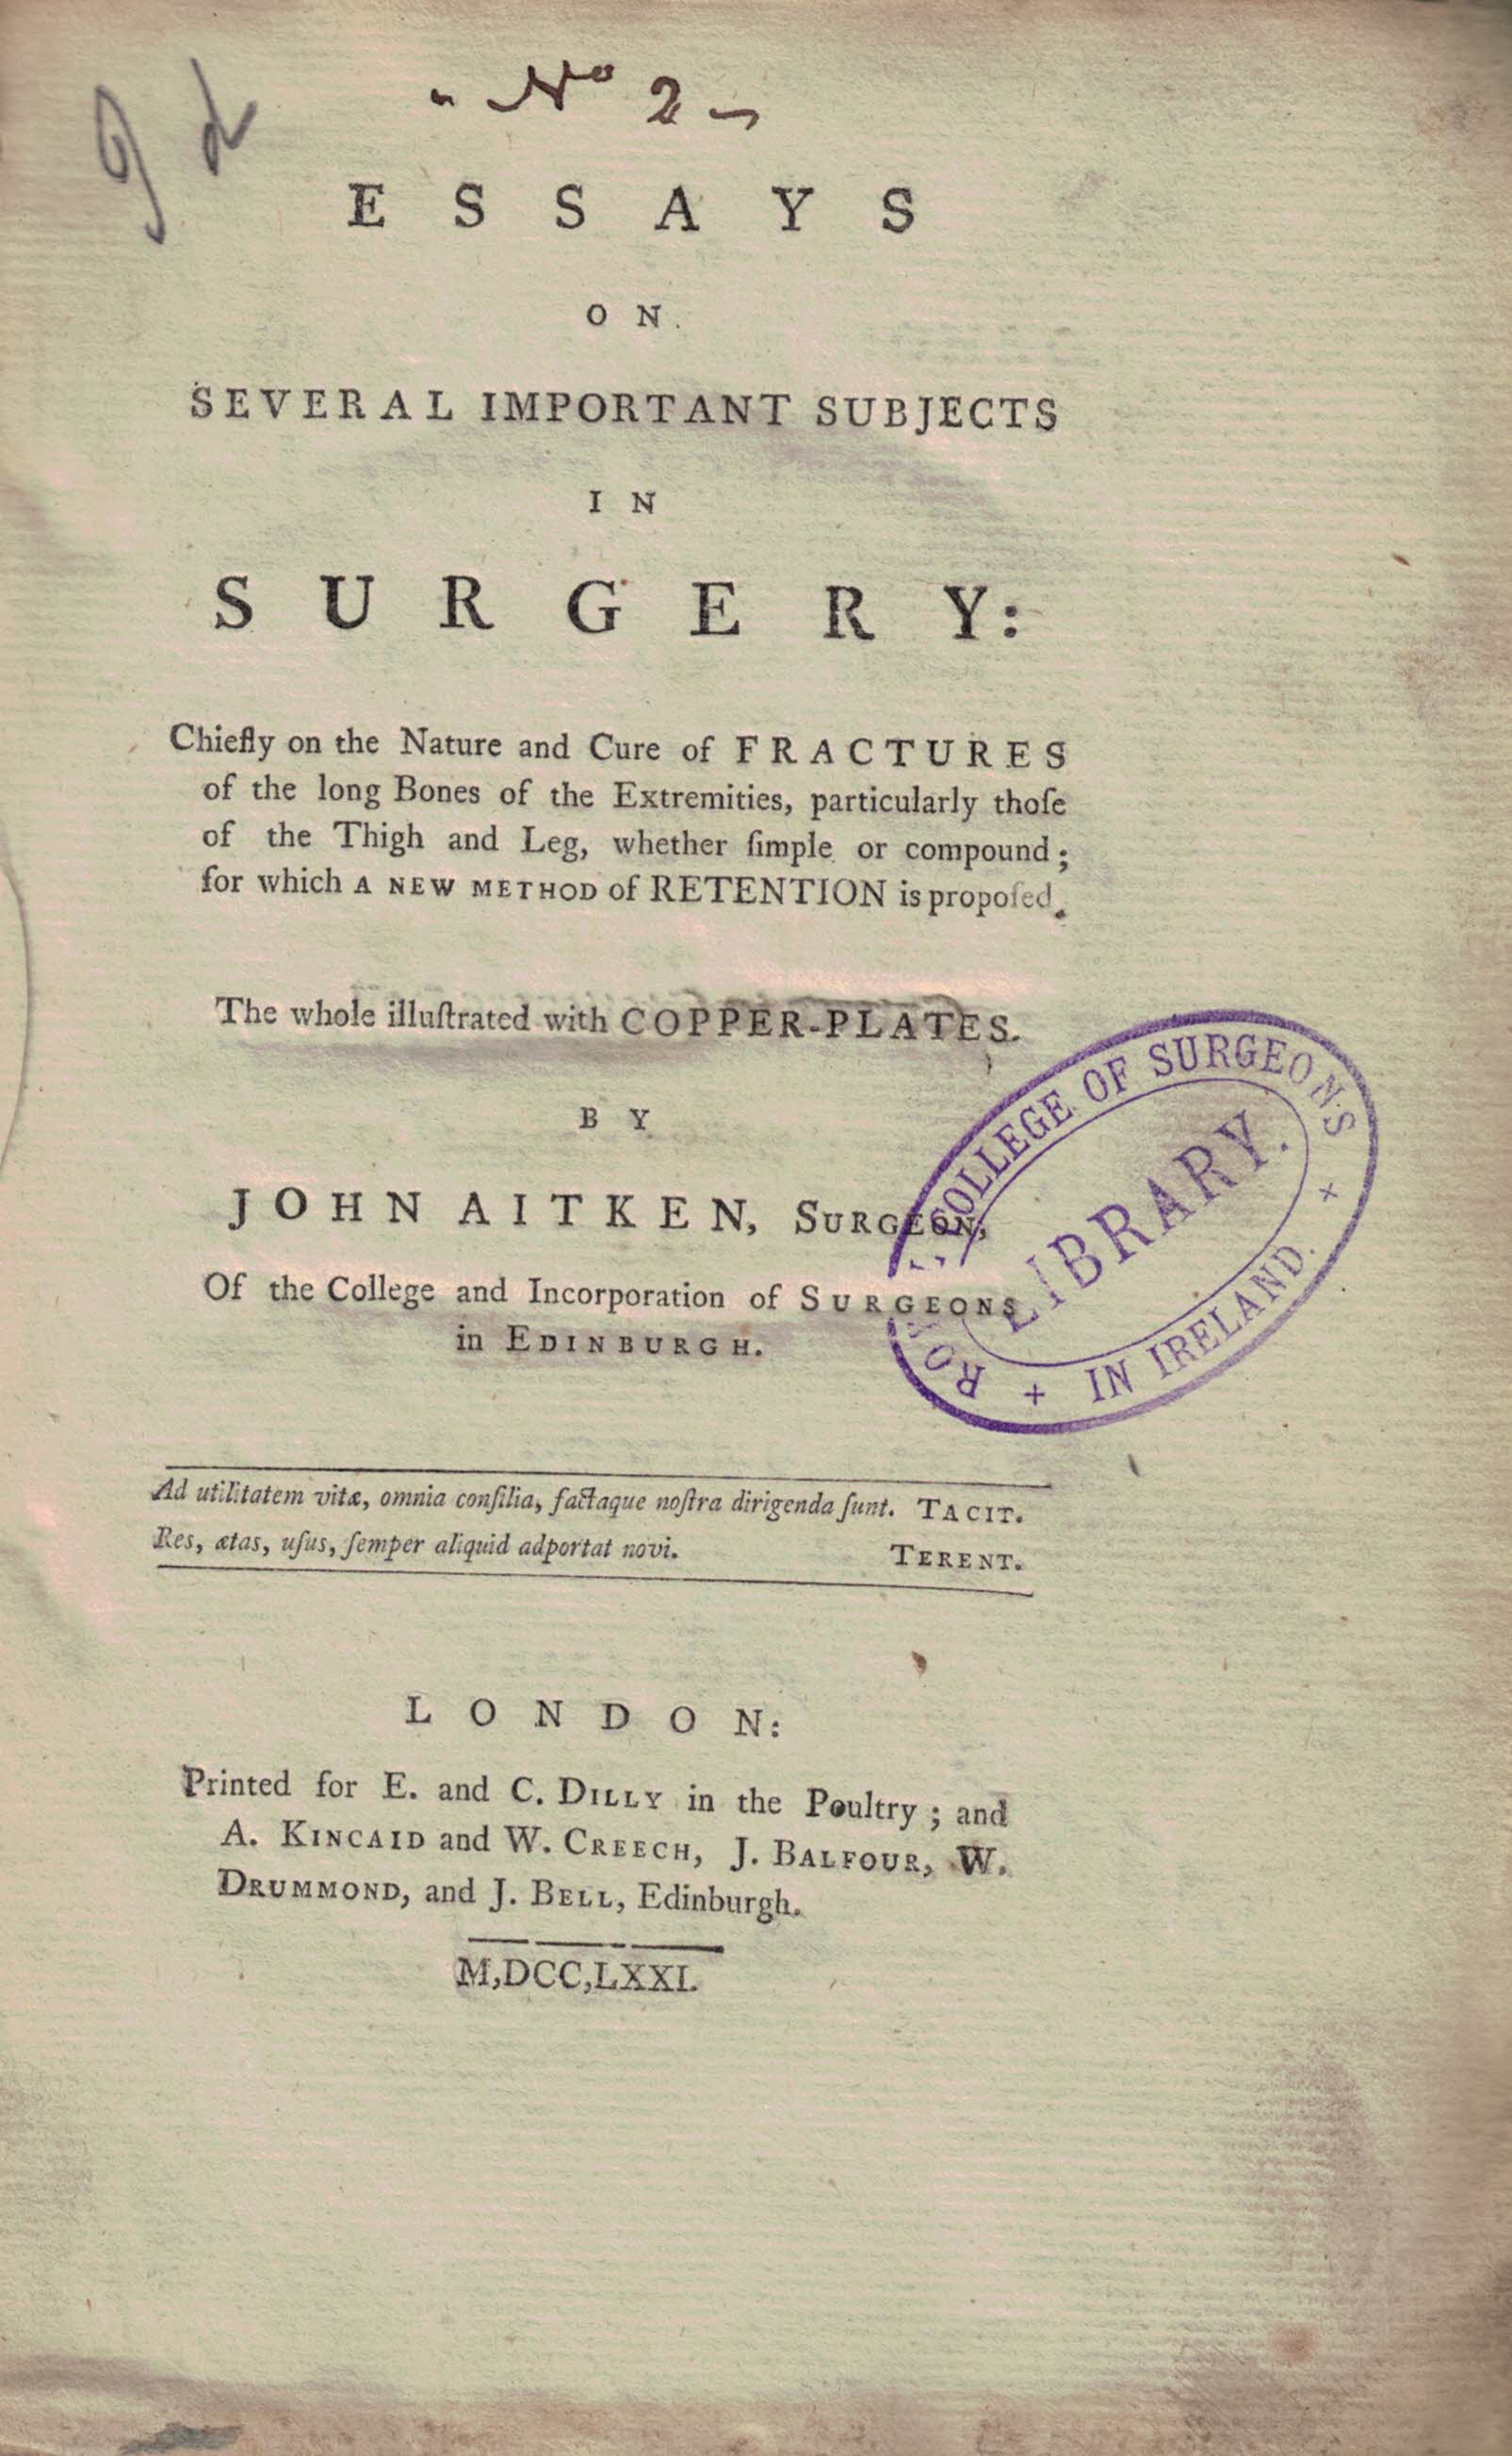 Essays on Several Important Subjects in Surgery; Chiefly on the Nature and Cure of Fractures of the Long Bones of the Extremities, Particularly those of the Thigh and Leg, Whether Simple or Compound; for which a New Method of Retention is Proposed.